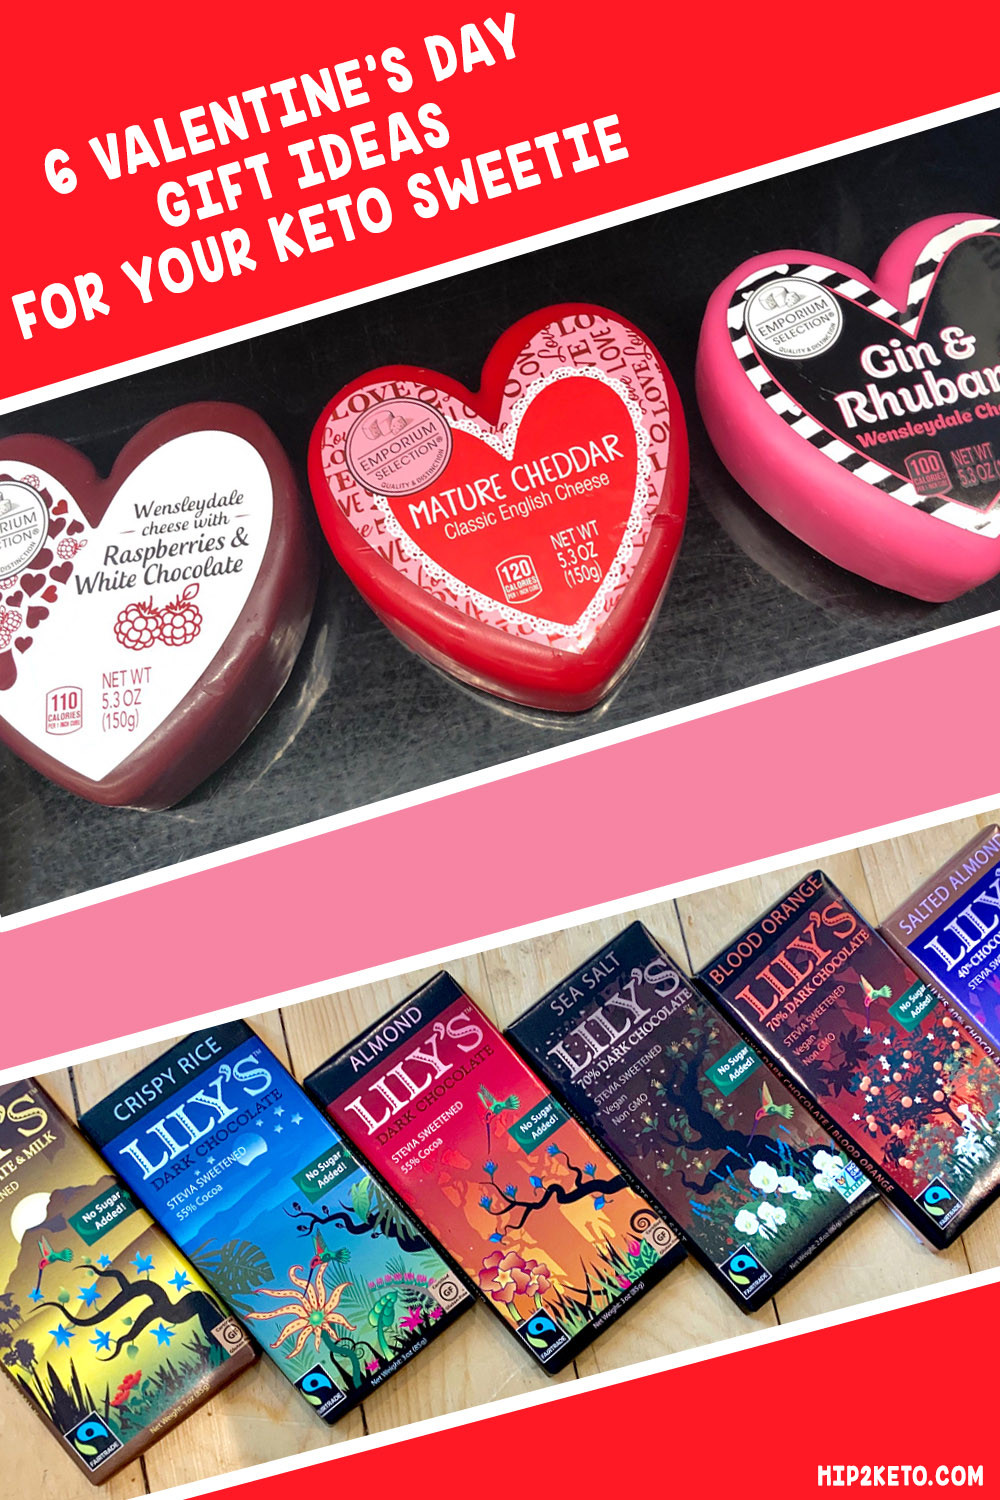 Keto Valentines Day Gifts
 Best Keto Valentine s Day Gifts For Your Sugar Free